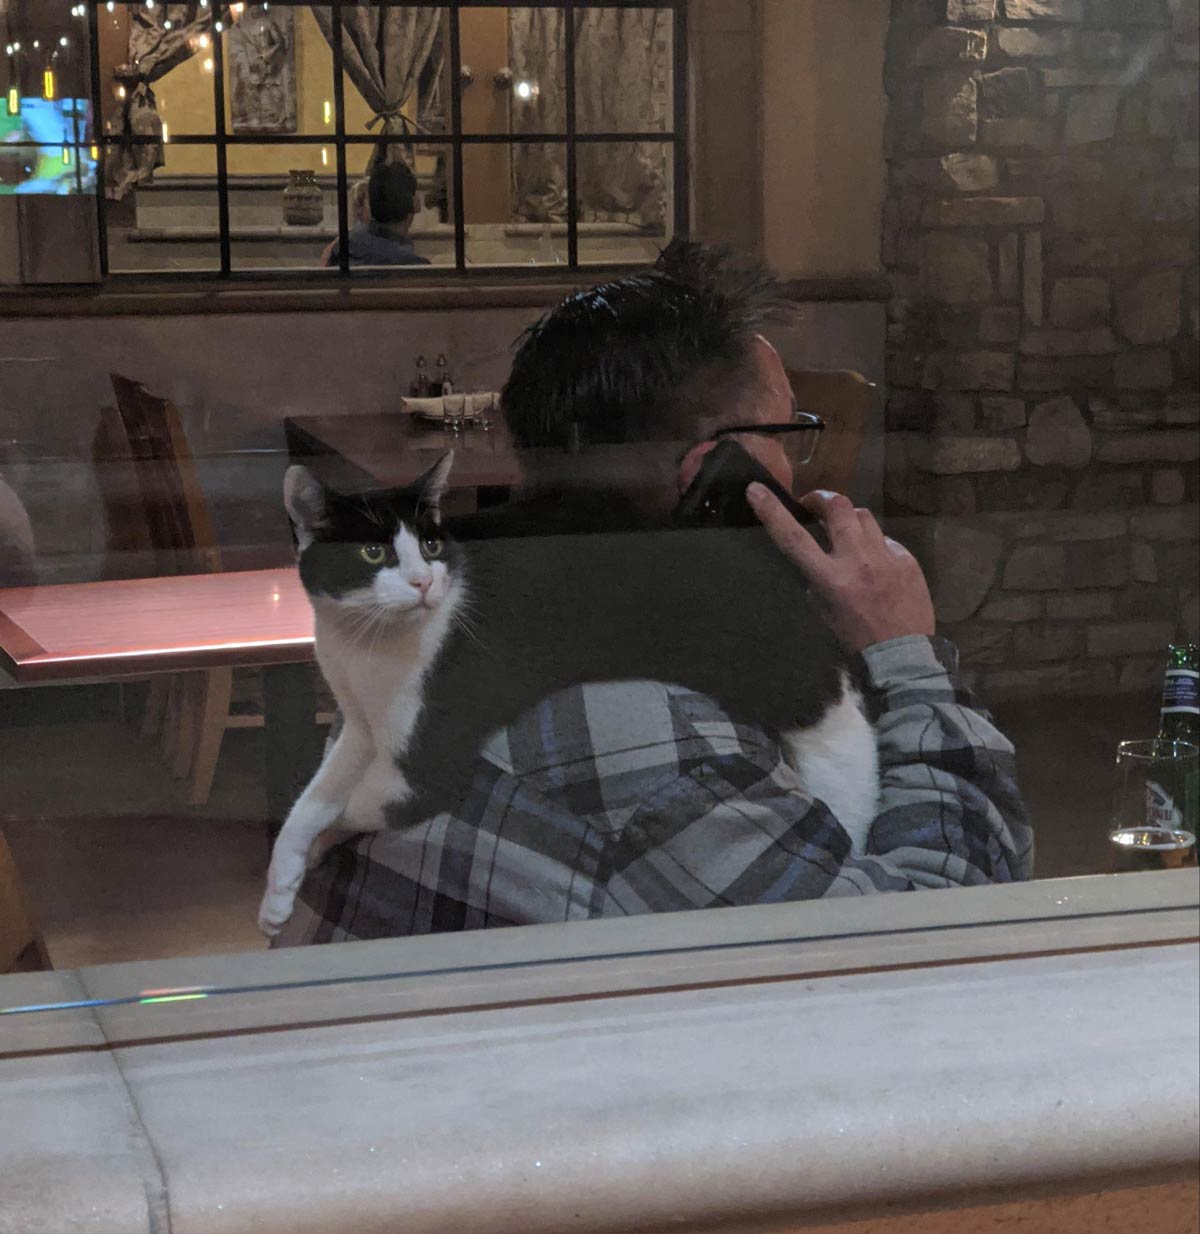 Saw this guy on a phone call at the restaurant I was eating at, with a cat chilling on his shoulder